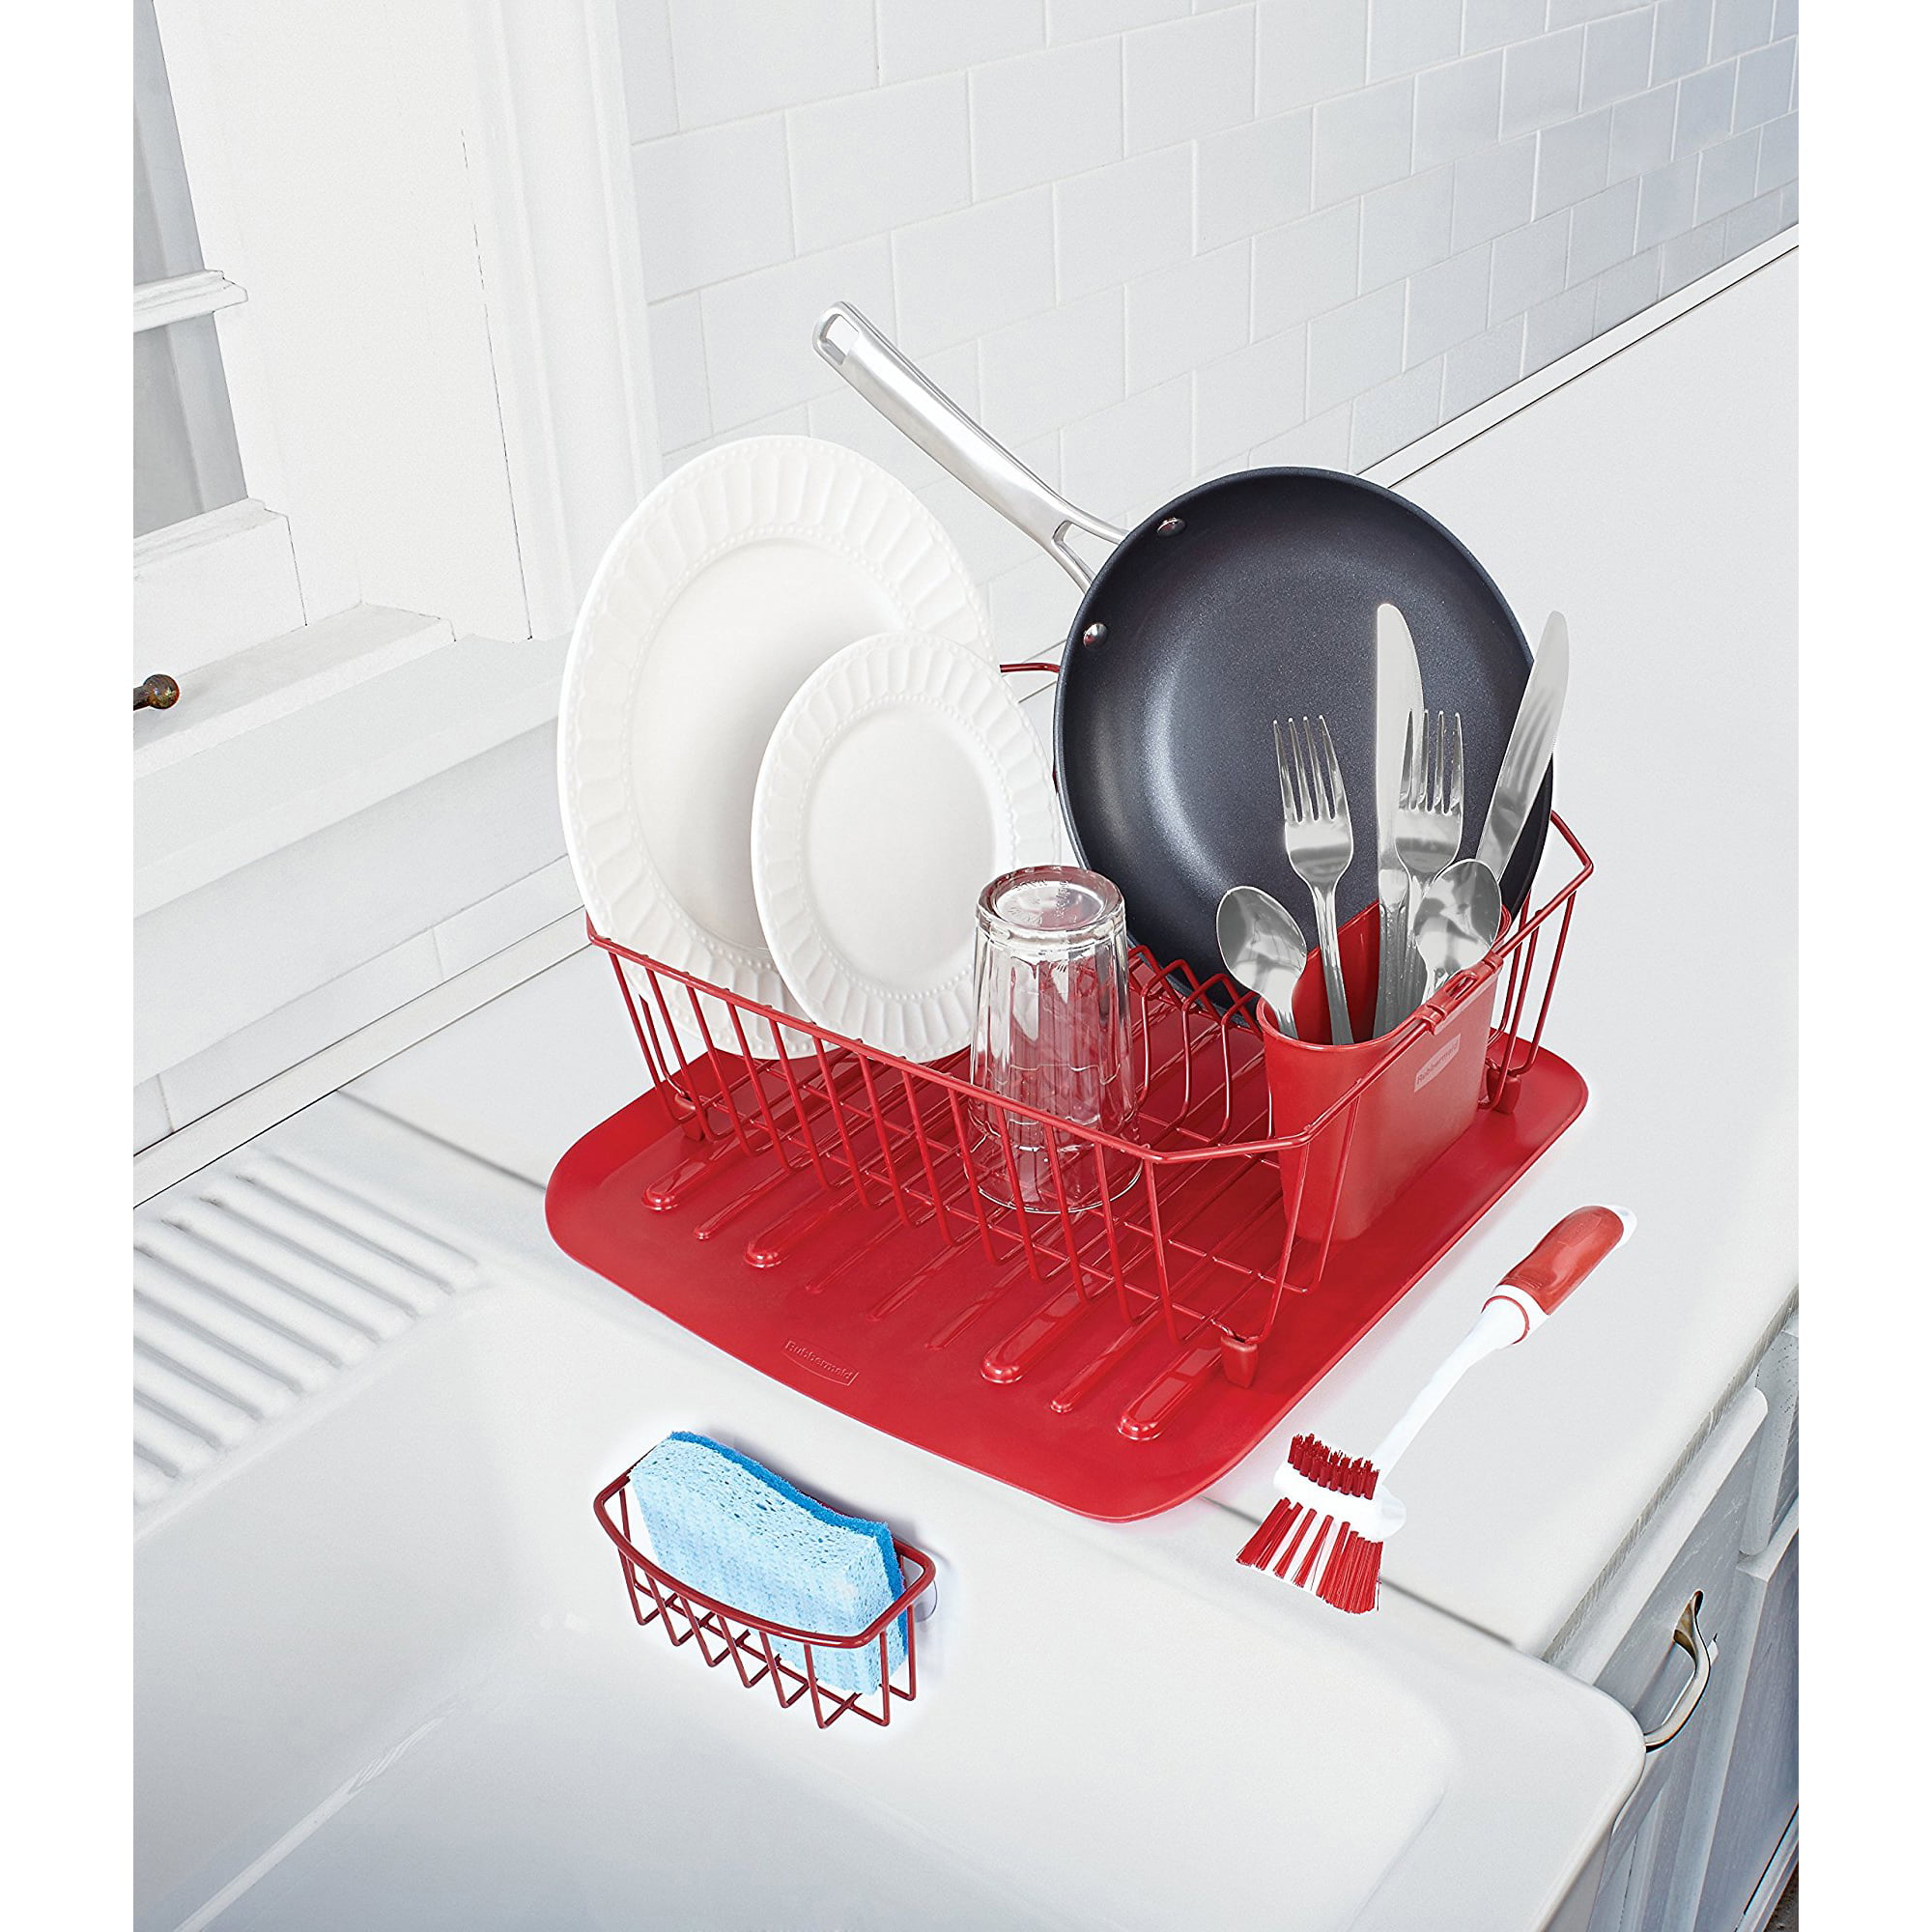 Rubbermaid® Antimicrobial Dish Drying Rack with Drainboard, Raven